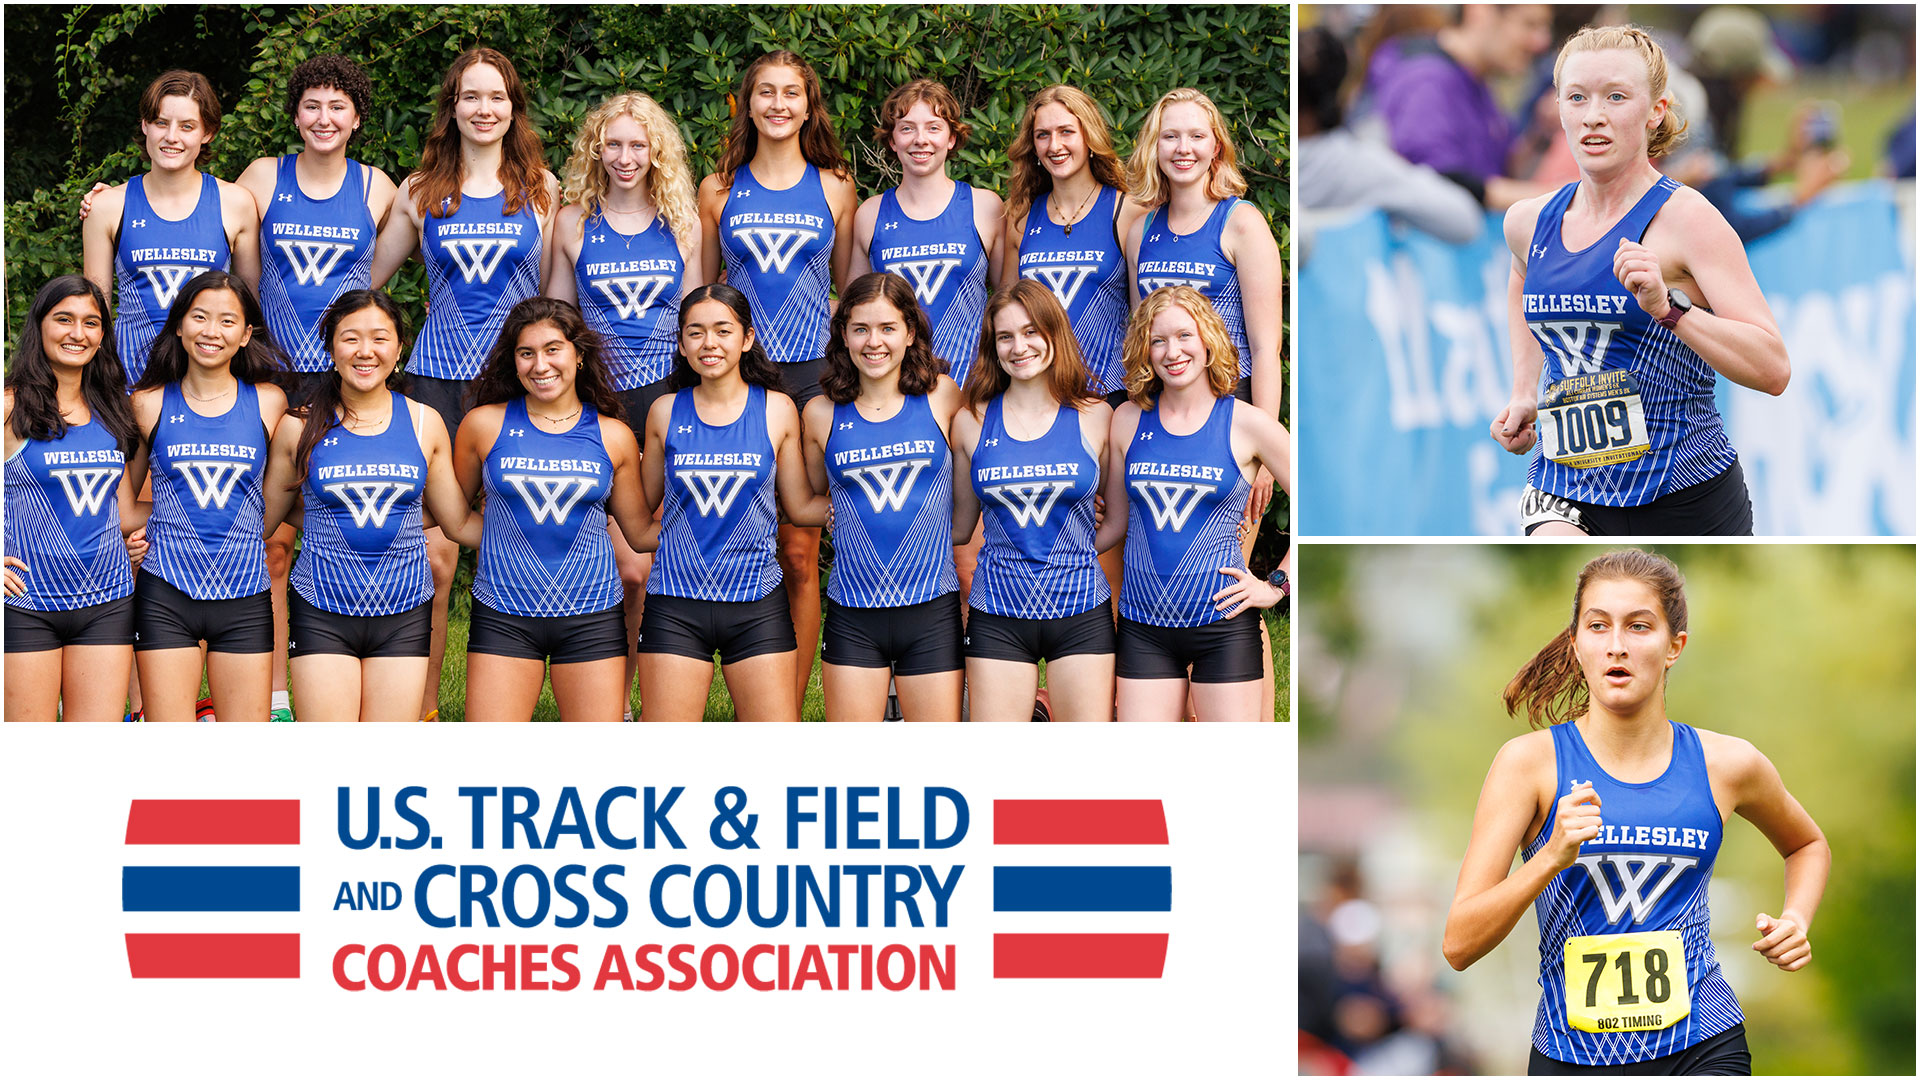 Wellesley cross country earned it's 10th consecutive USTFCCCA All-Academic Team honor. (Frank Poulin)